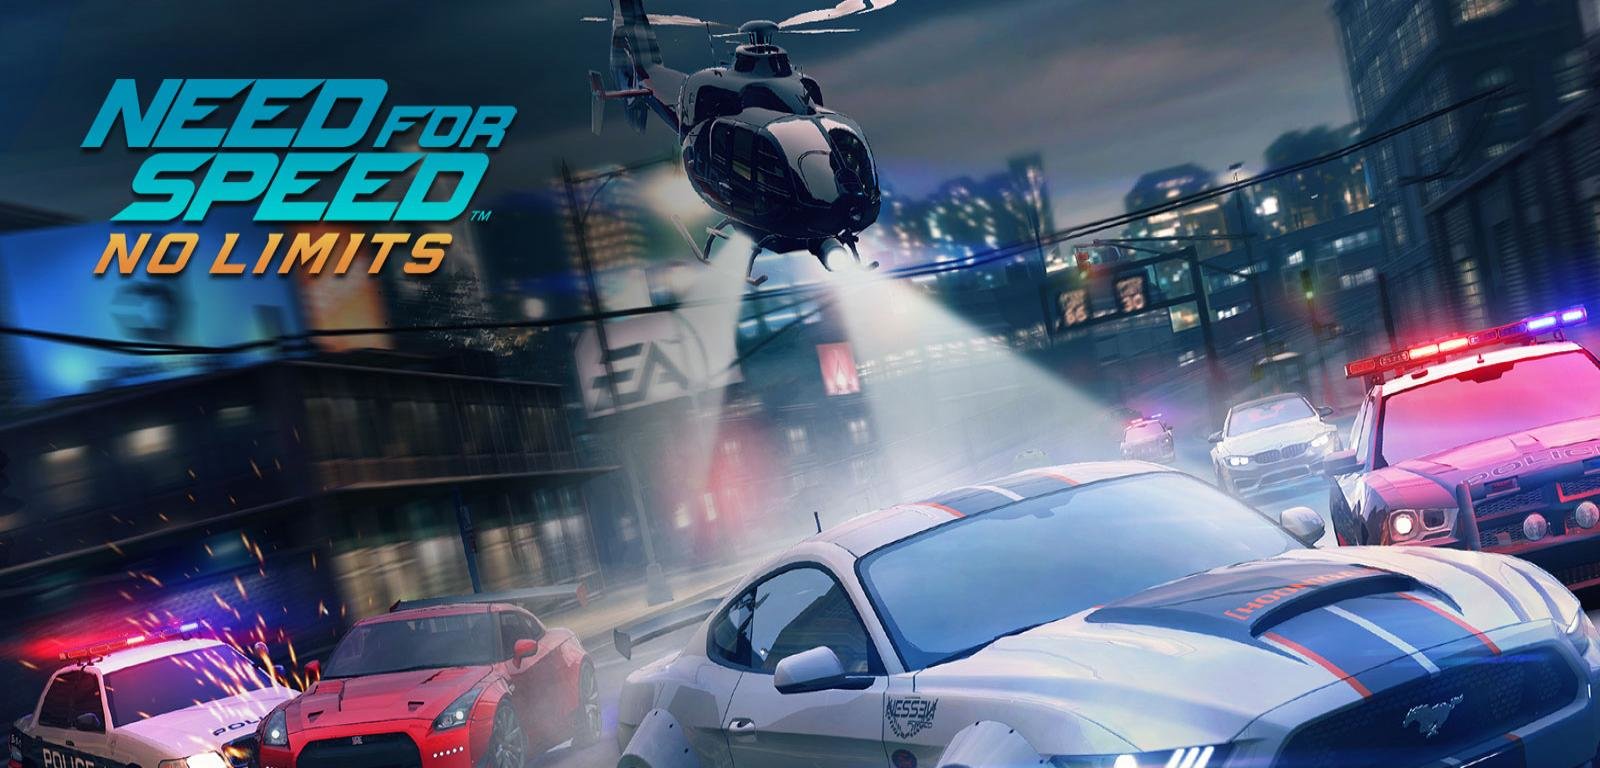 Best Need For Speed - Need For Speed Background - HD Wallpaper 